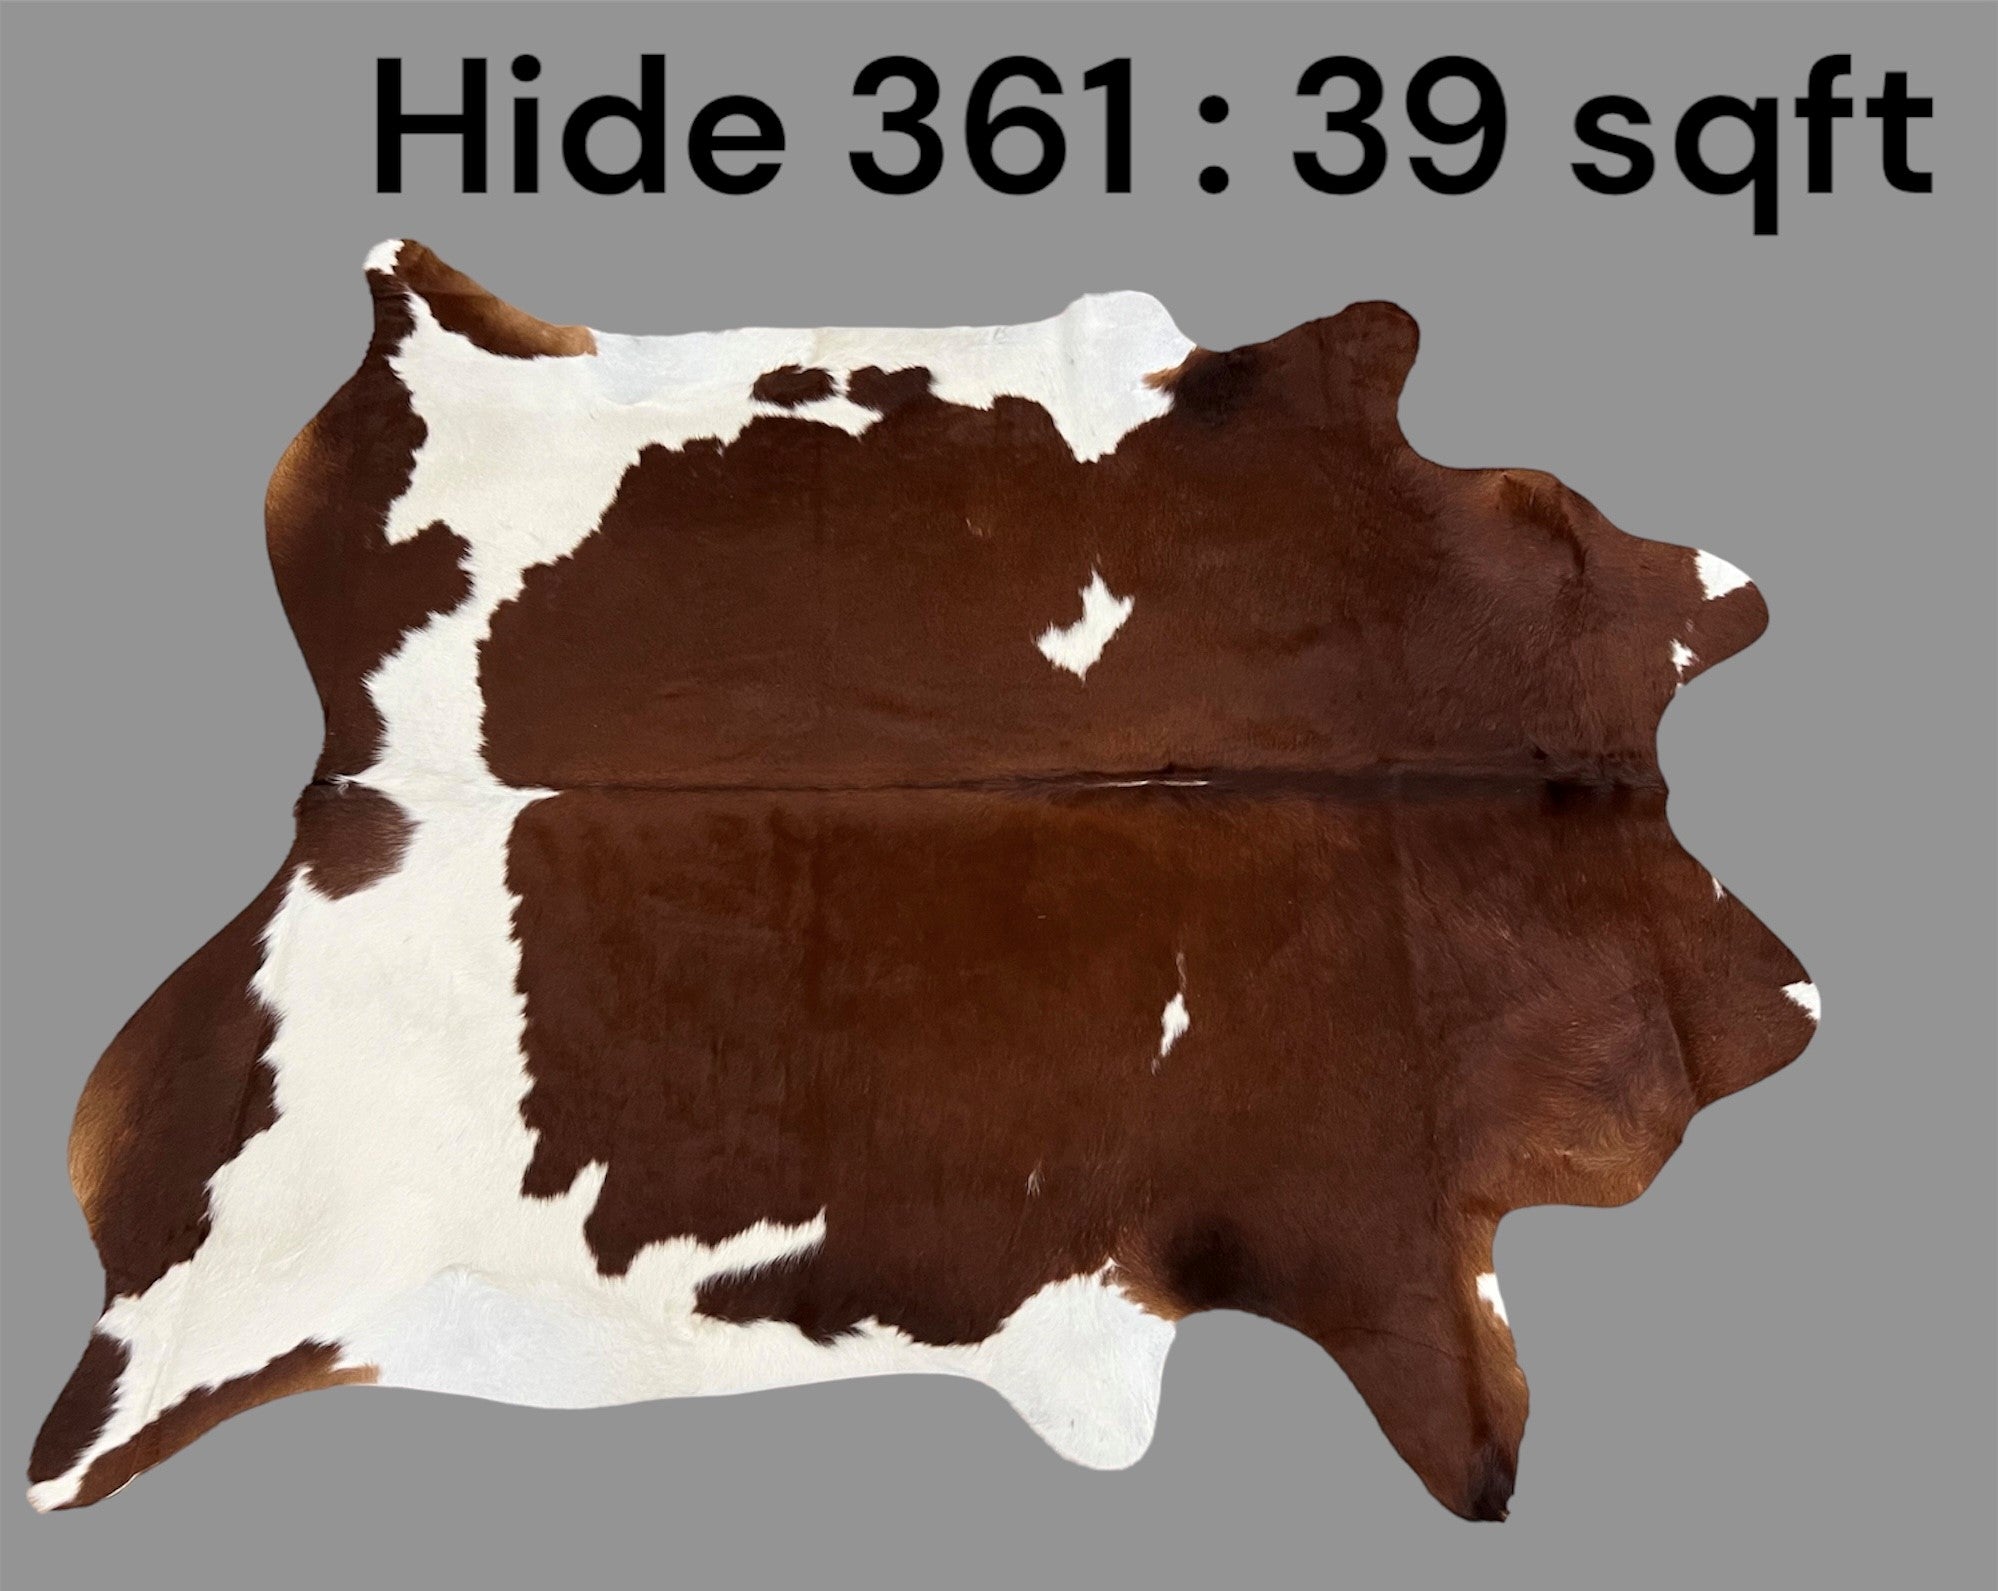 Natural Hair On Cow Hide : This Hide Is Perfect For Wall Hanging, Leather Rugs, Leather Upholstery & Leather Accessories. (Hide361)